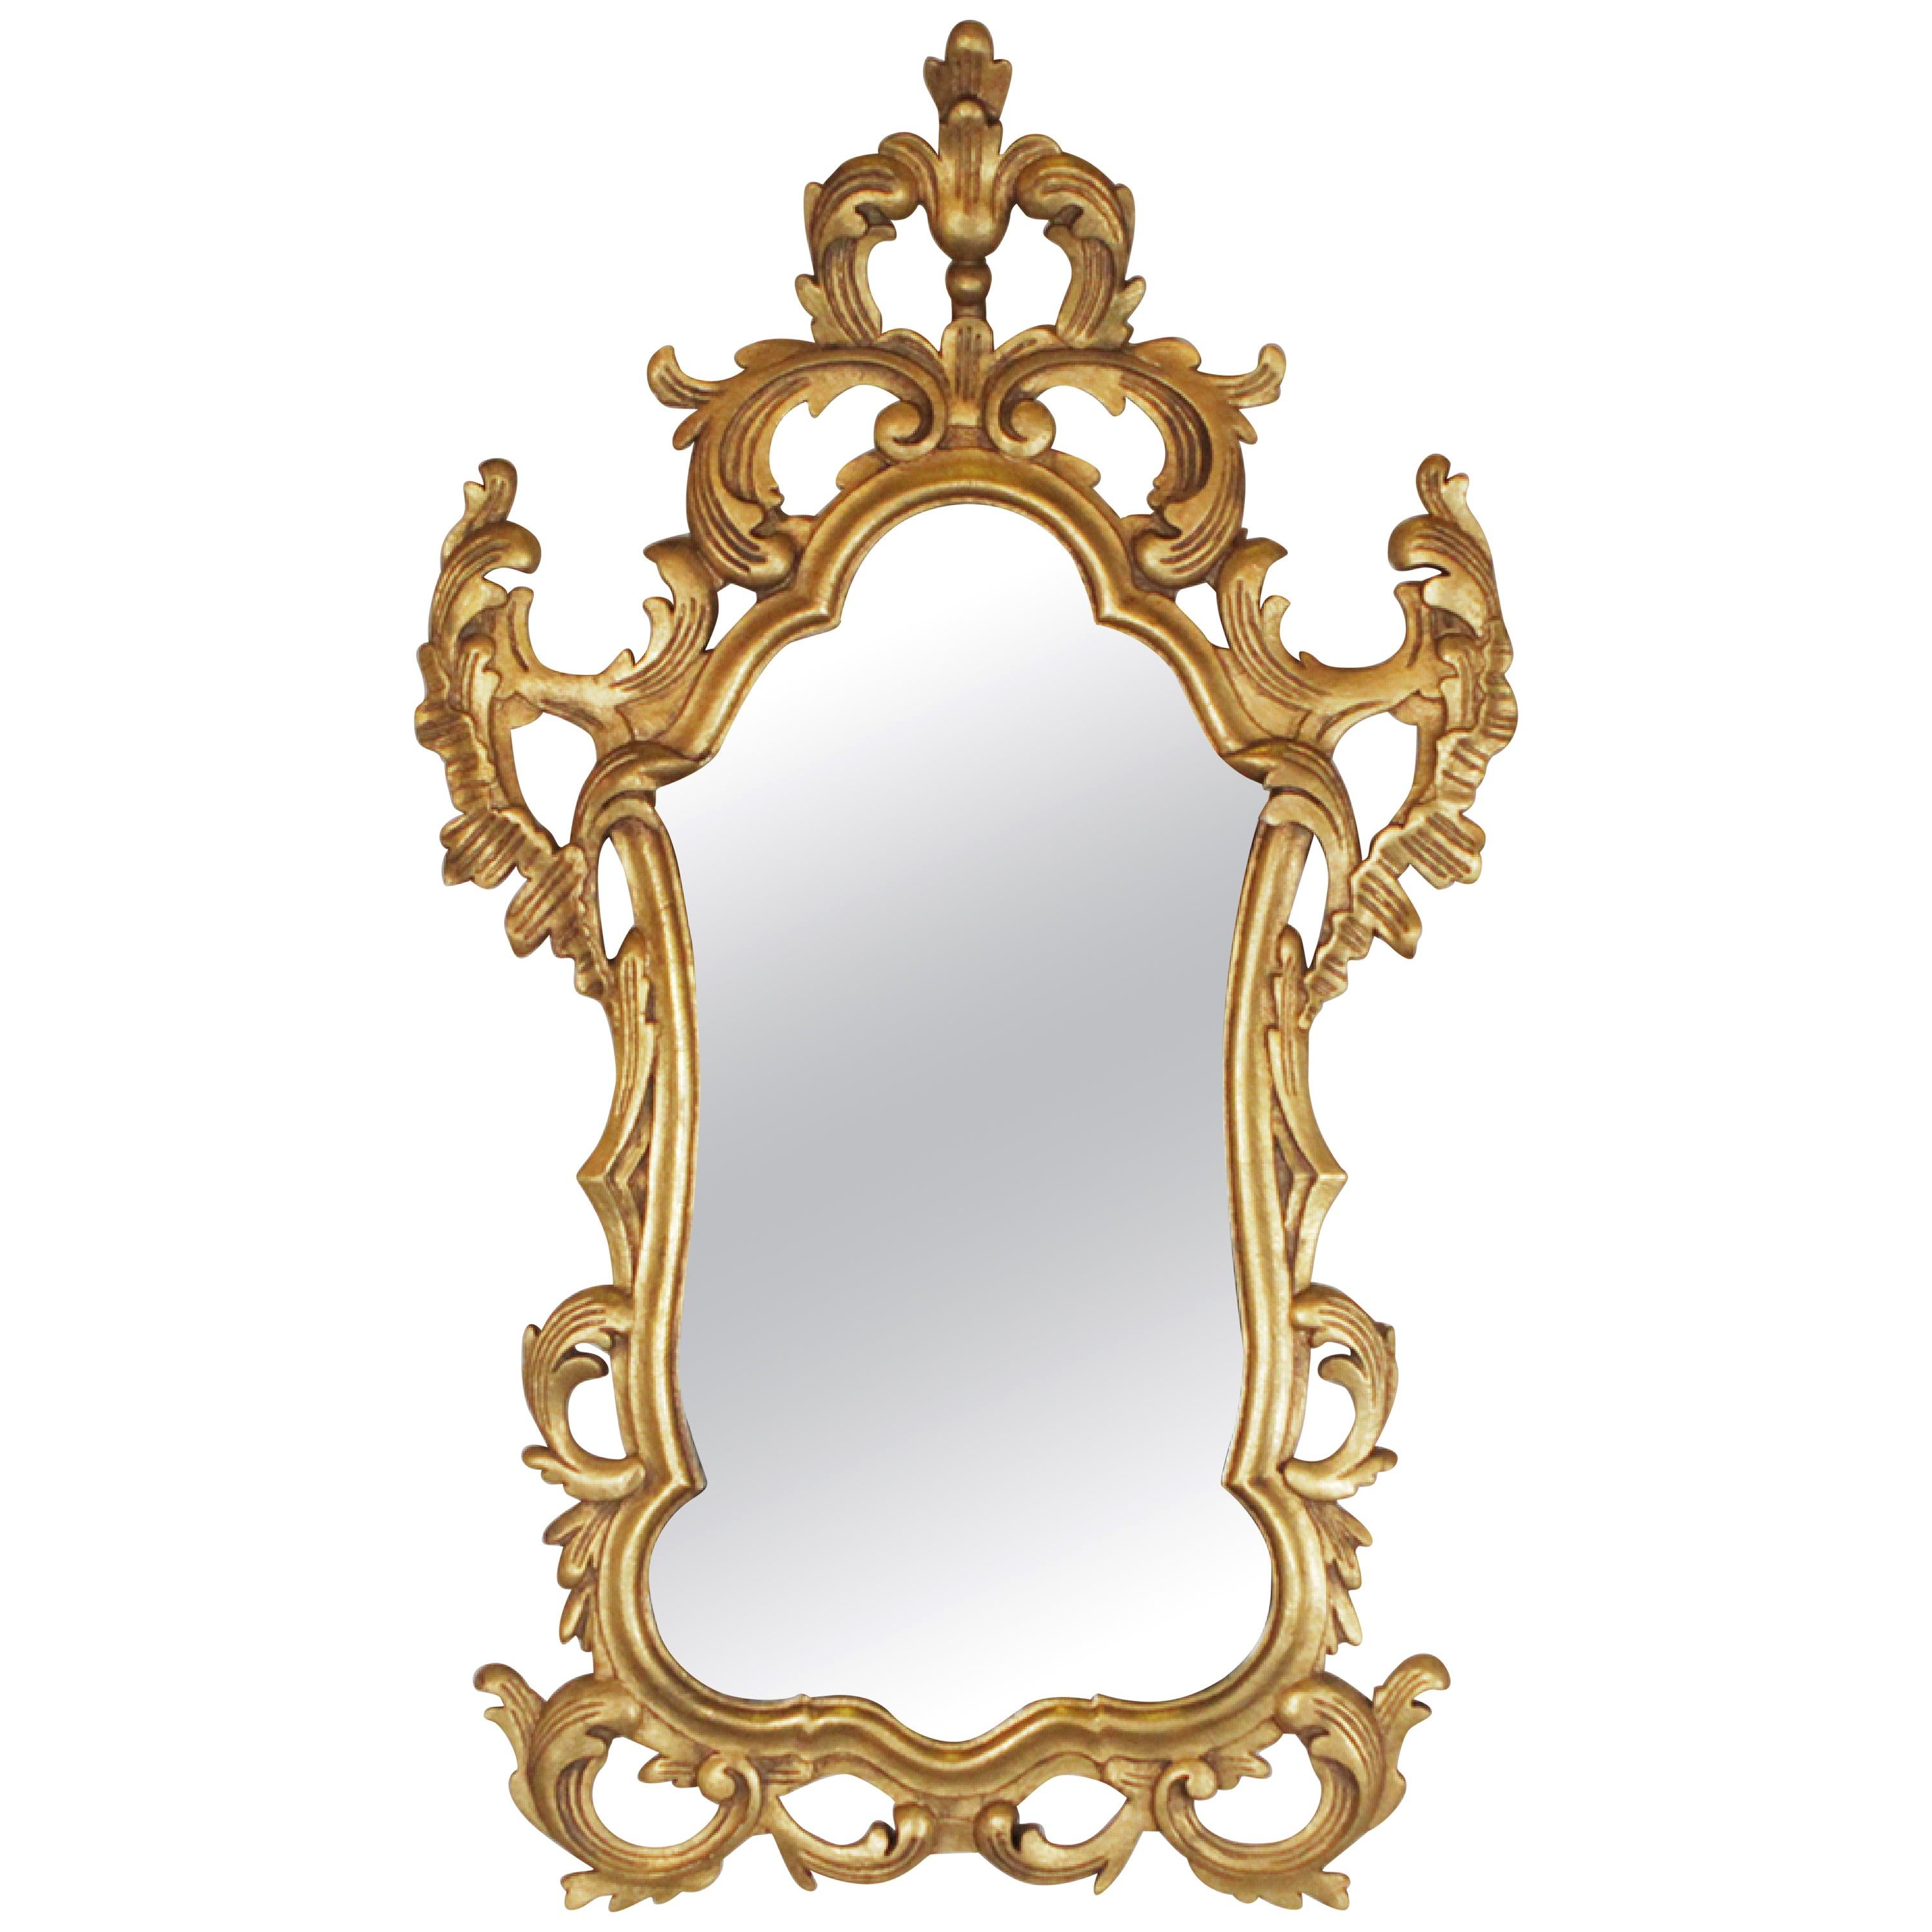 Gold Gilt Rococo Style Carved Wood Mirror Made in Spain